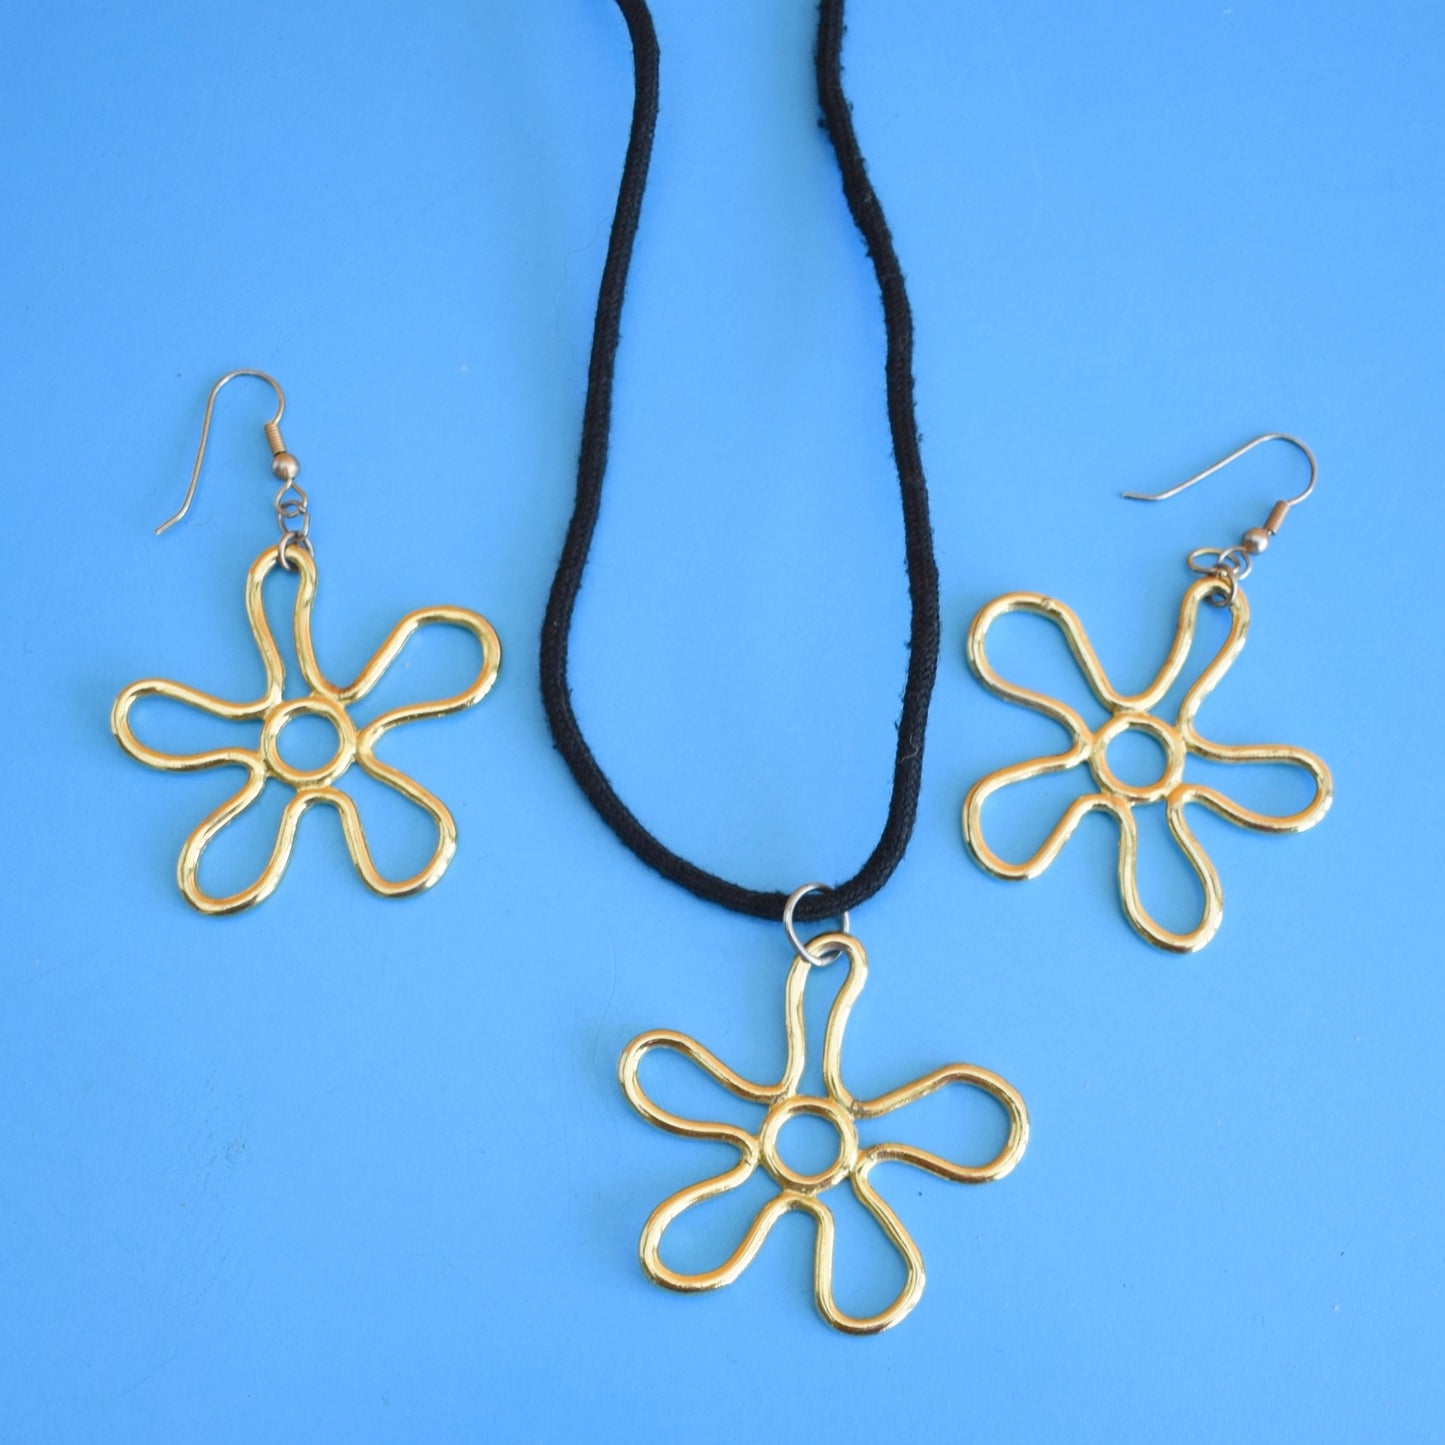 Vintage 1990s Necklace/ Earrings - Flower Power - Gold